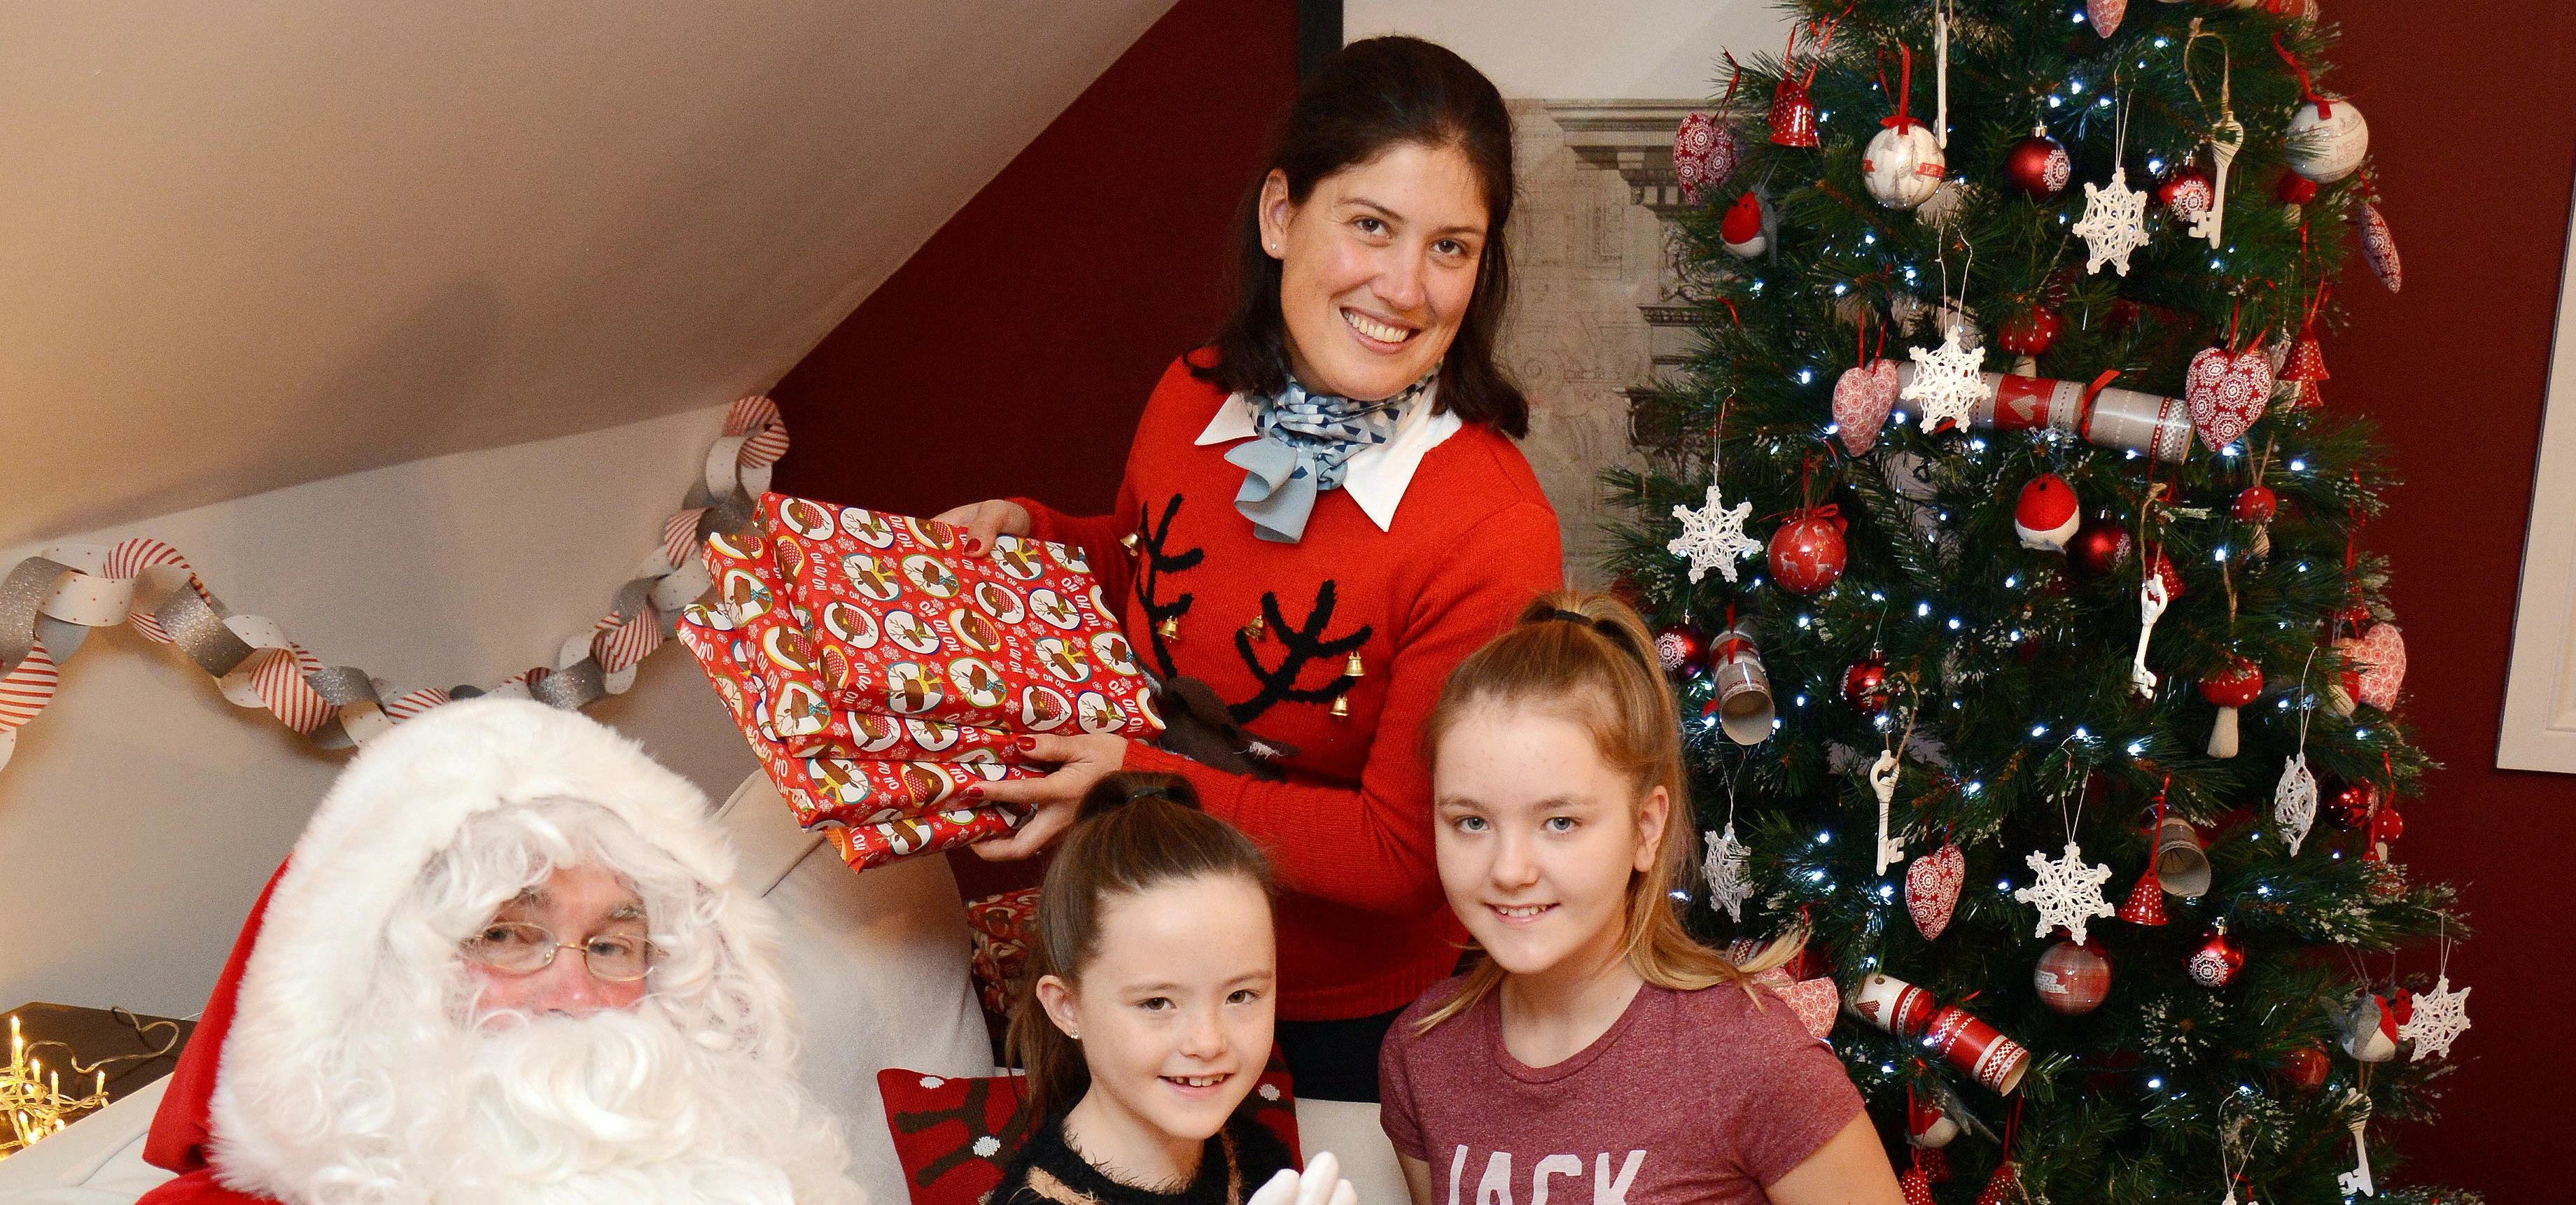 Santa's grotto at Grey Towers Village, which raised money for Zoe's Place in Middlesbrough